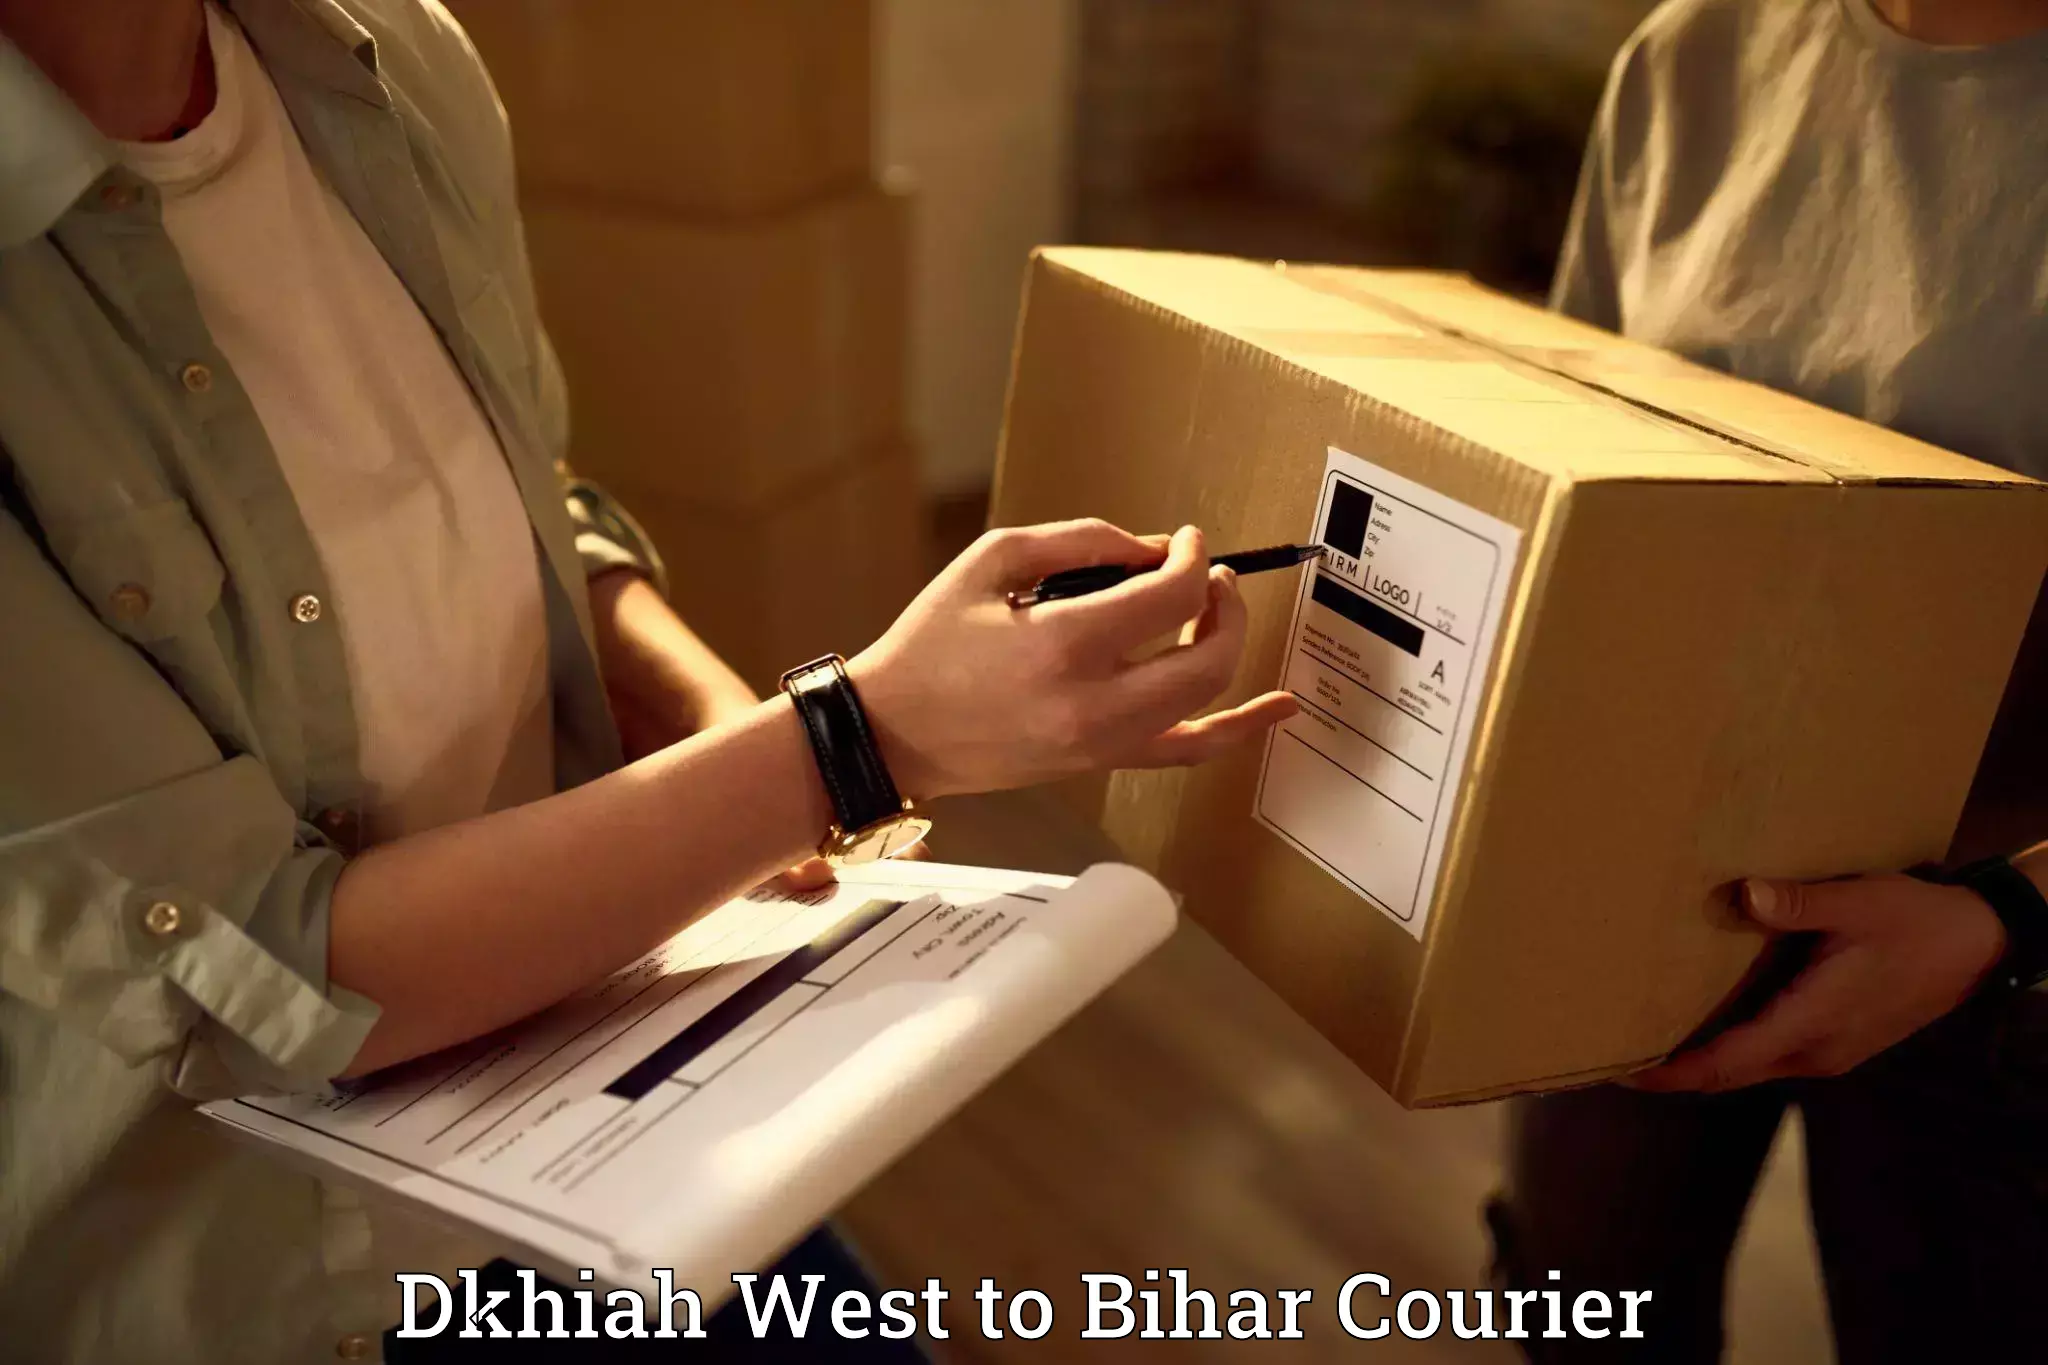 Quality relocation services in Dkhiah West to Mairwa